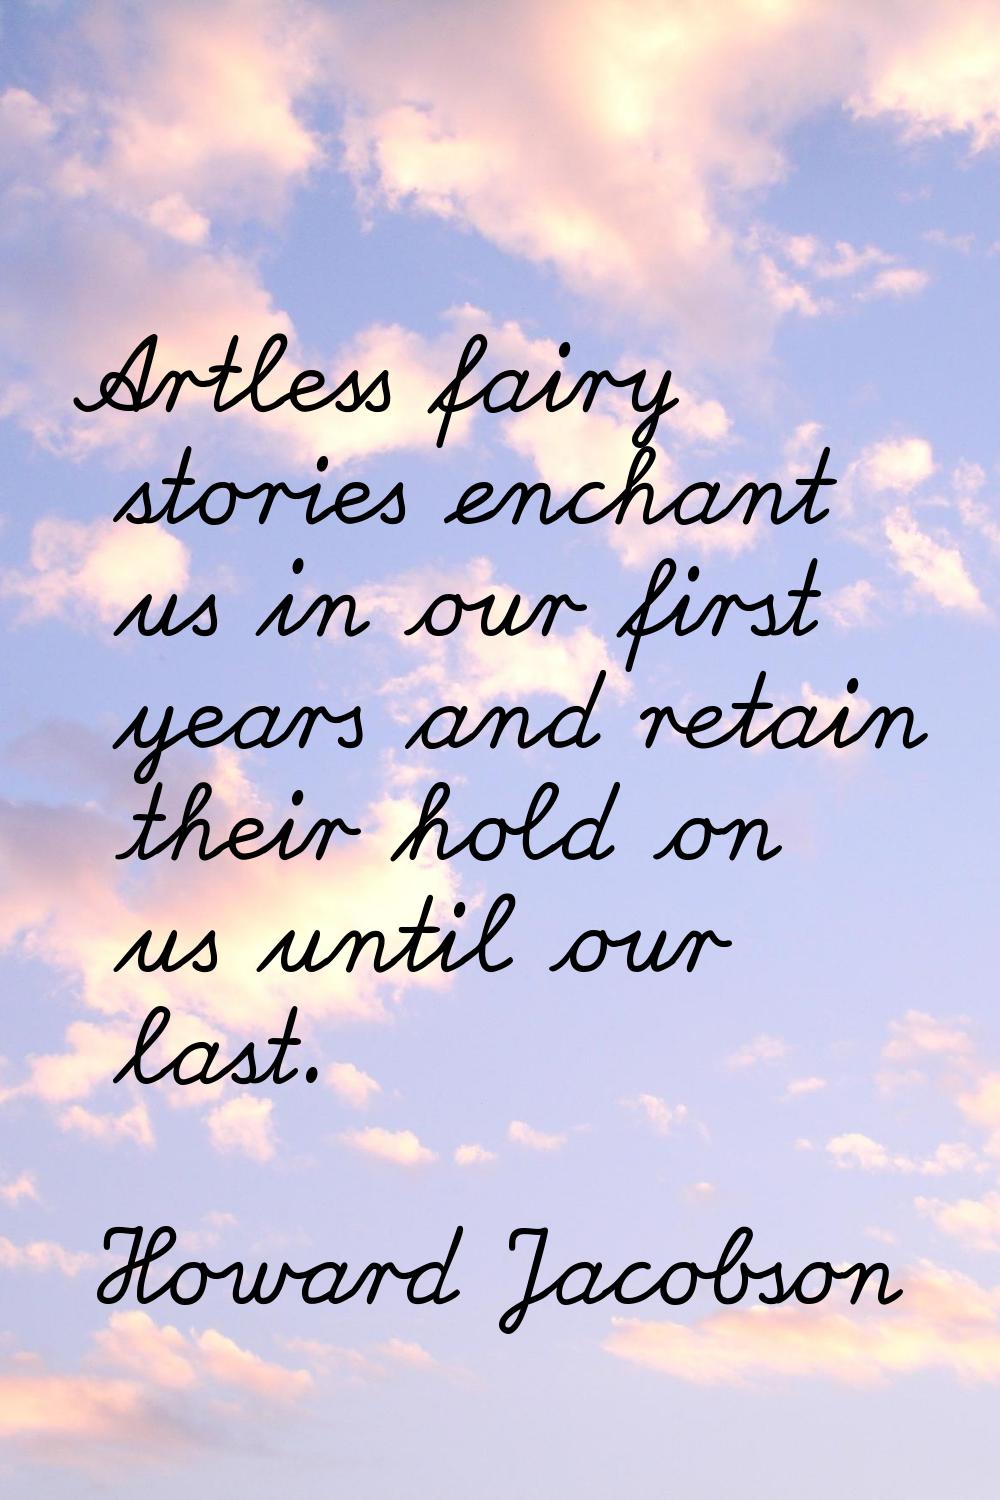 Artless fairy stories enchant us in our first years and retain their hold on us until our last.